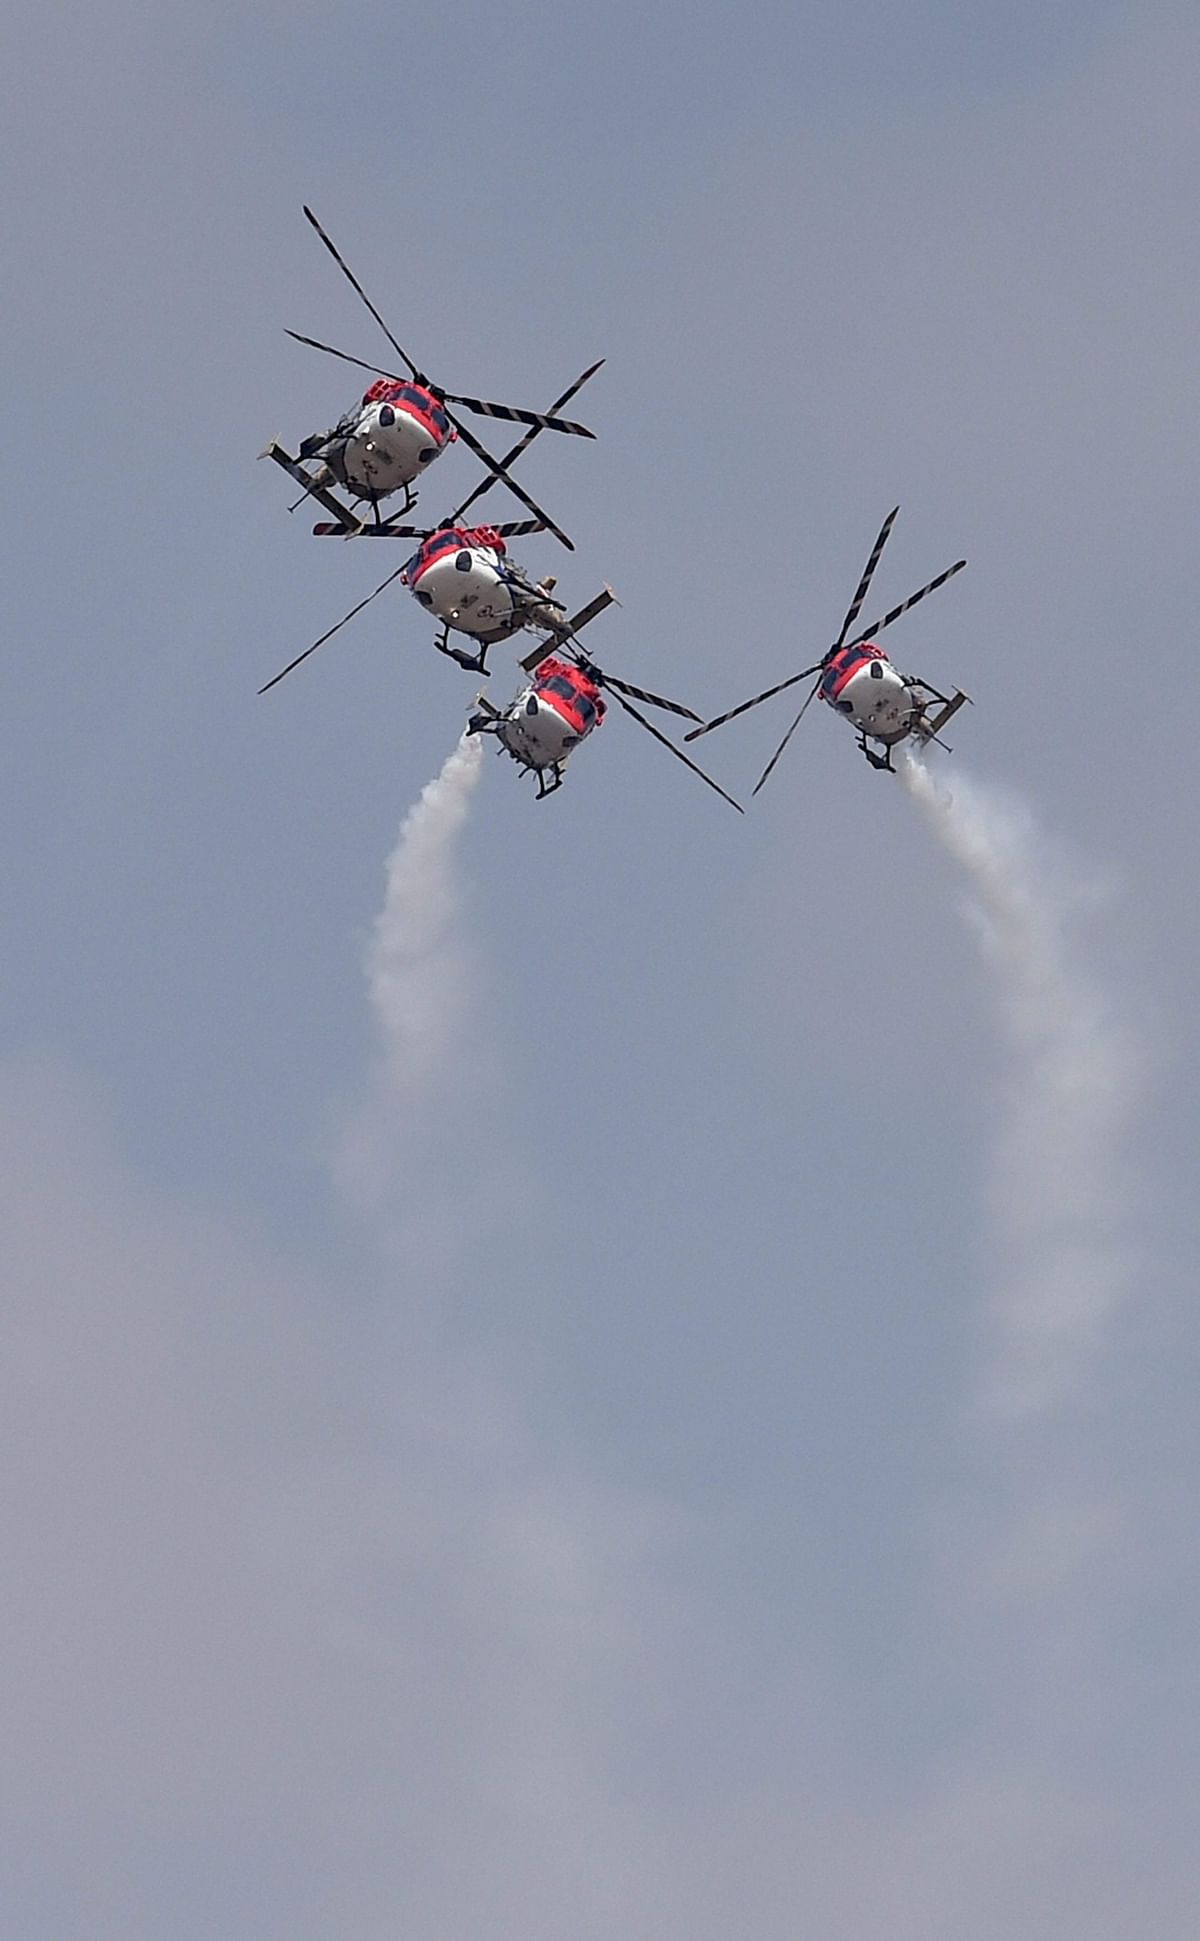 

The Bengaluru skies dazzled with somersaults and stunts by the daredevilry of world famous aerobatics teams.